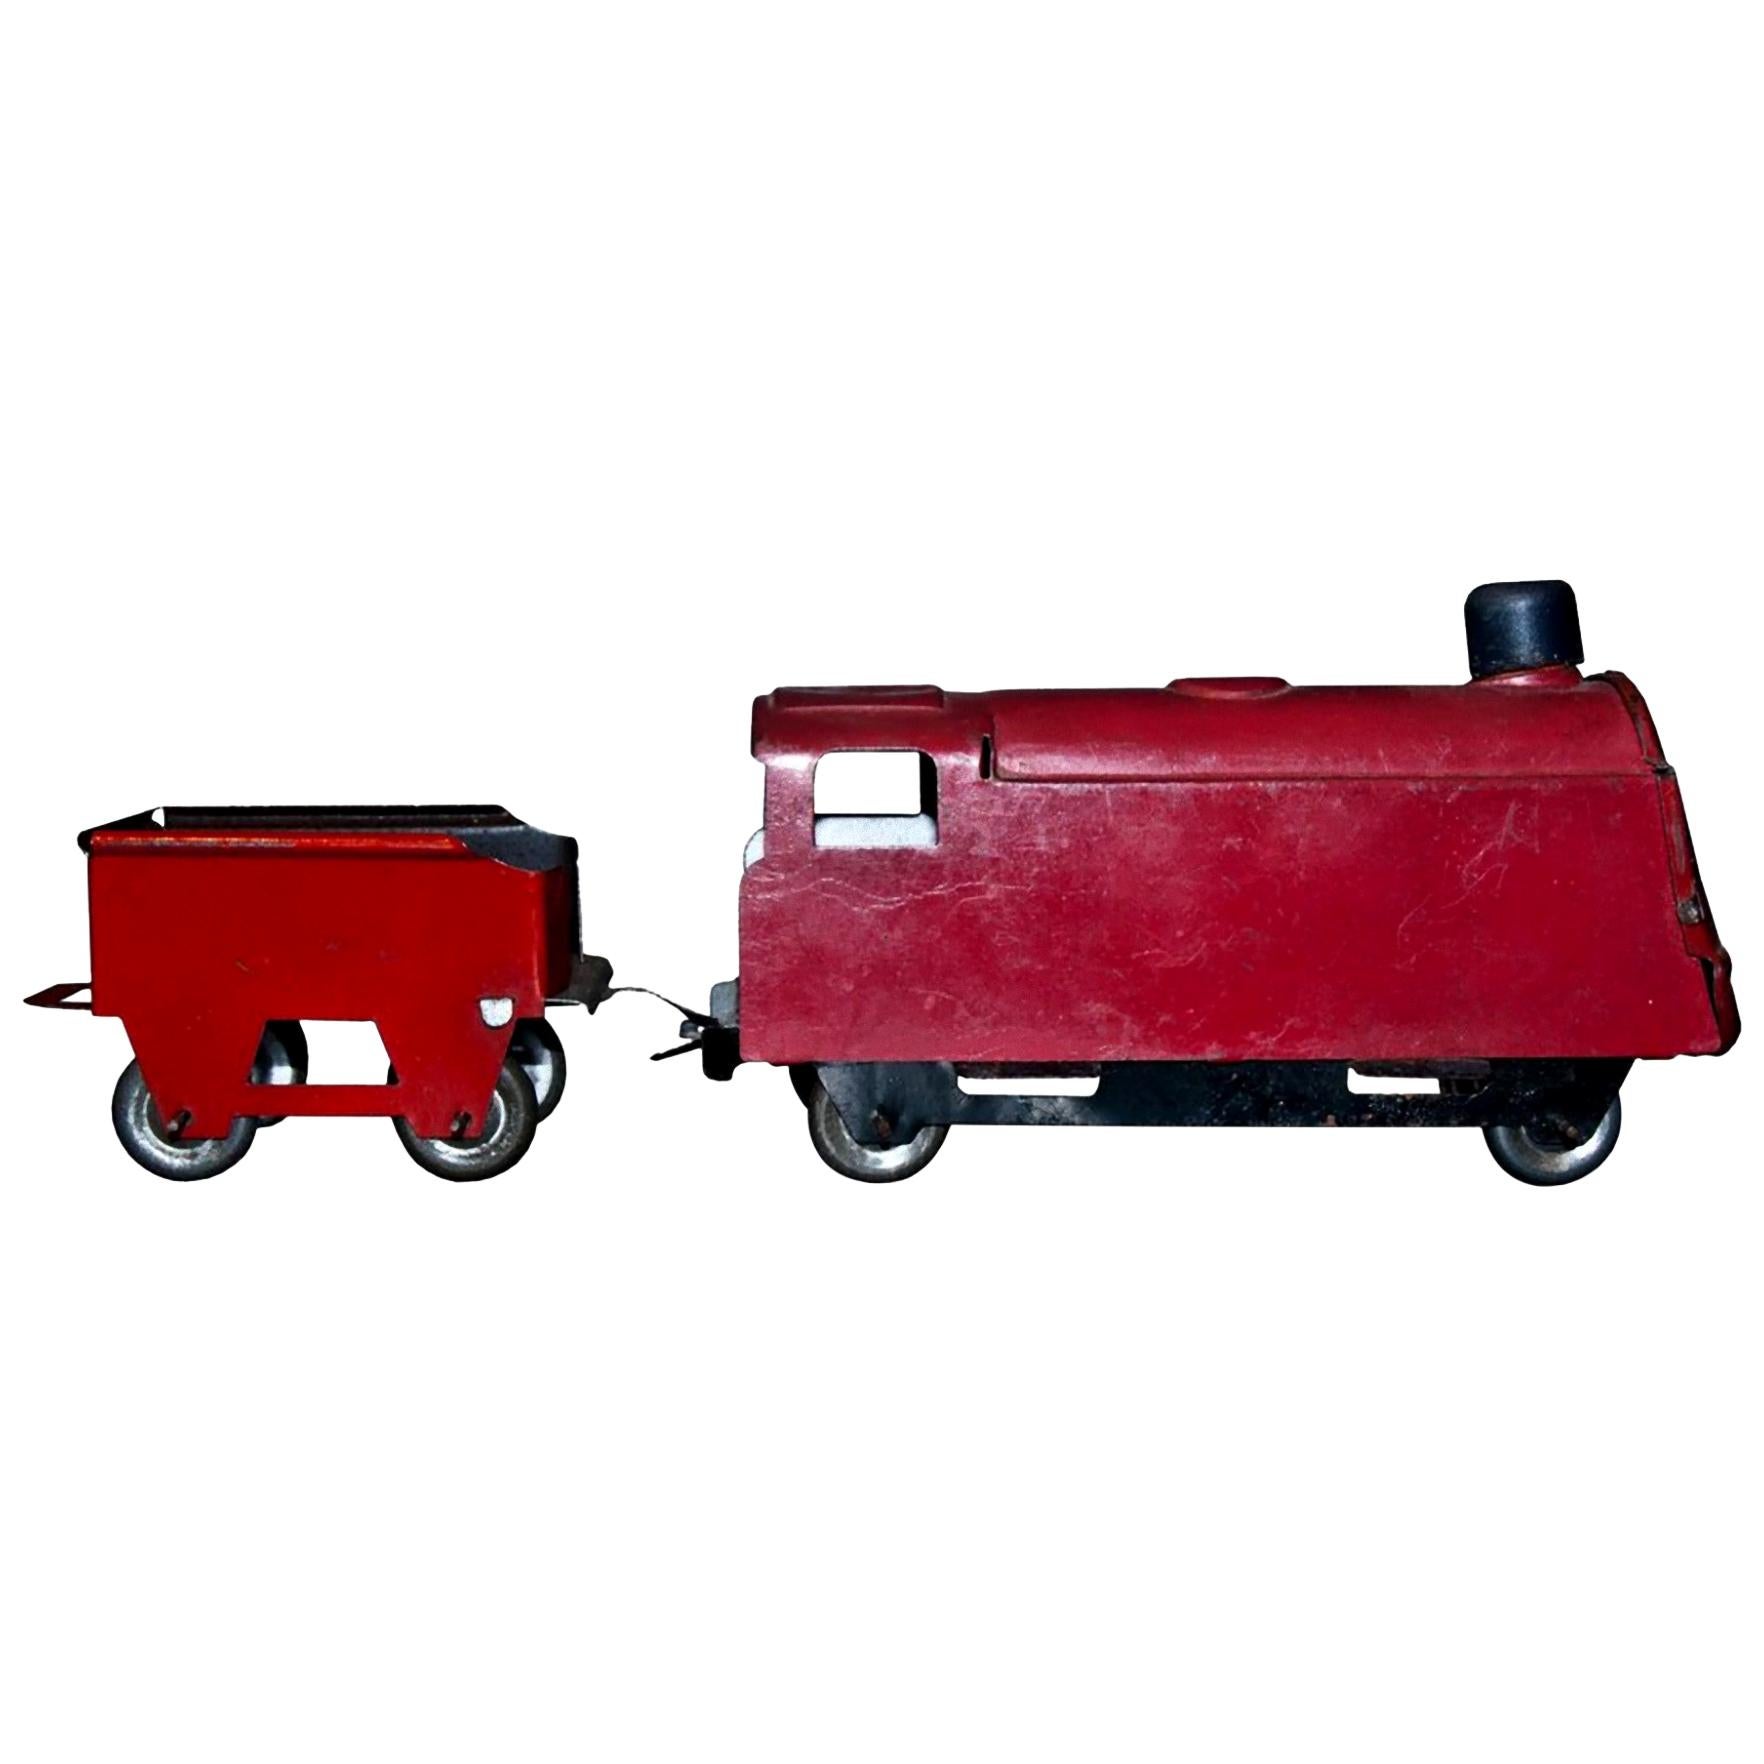 Original Vintage Toy, Small Train and Trailer, 1920s For Sale